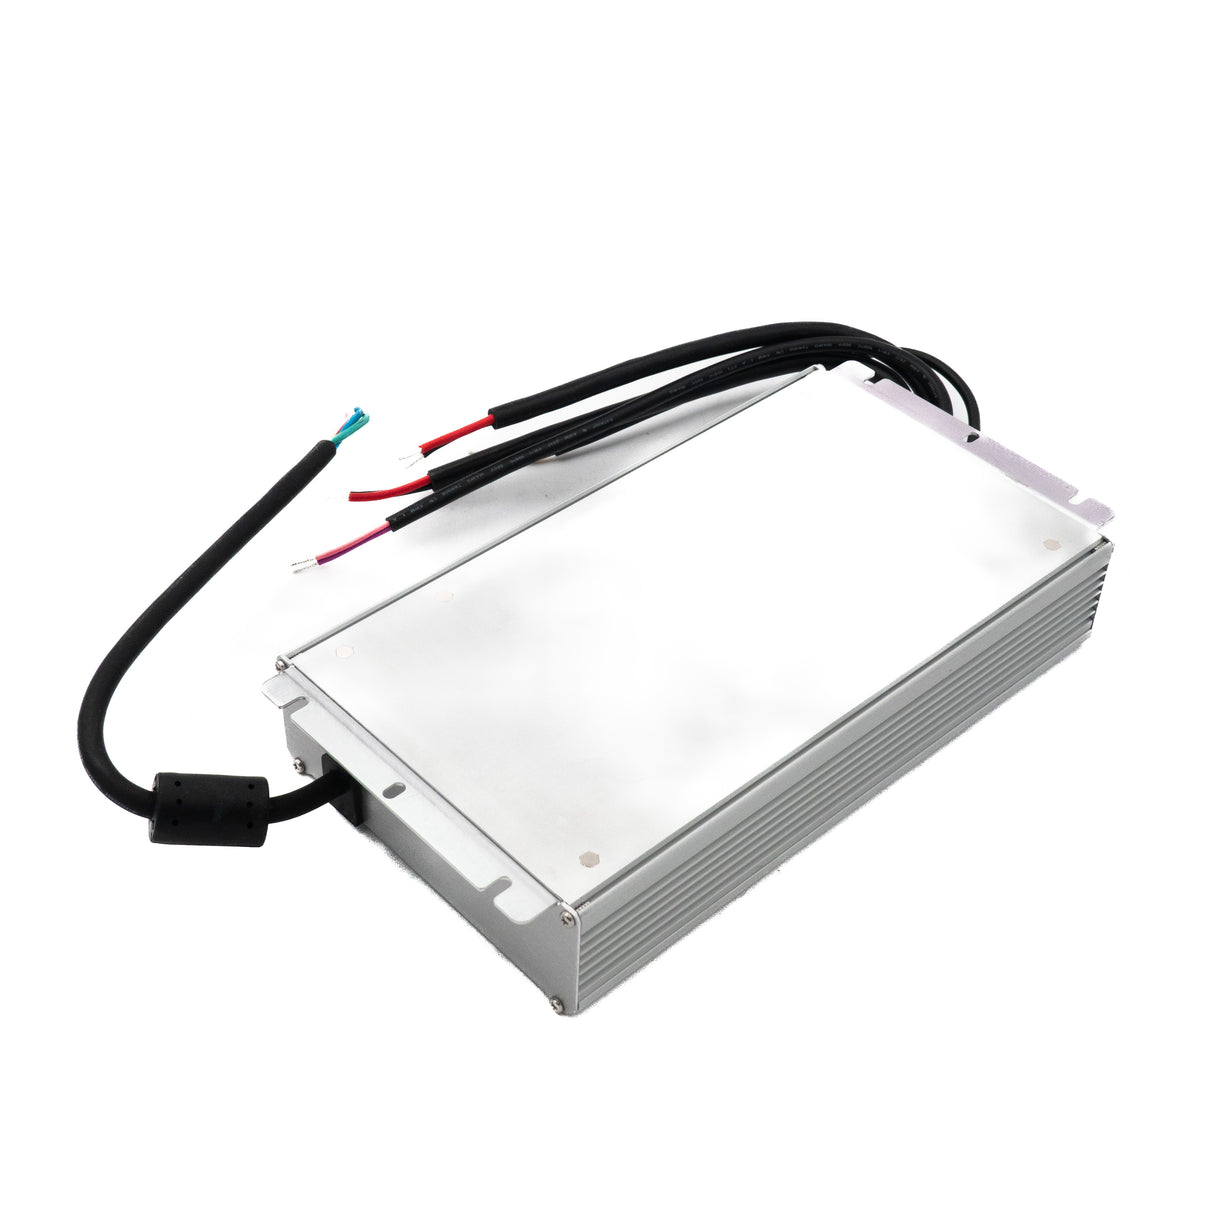 Mean Well HLG-600H-24B Power Supply 600W 24V- Dimmable - PHOTO 2